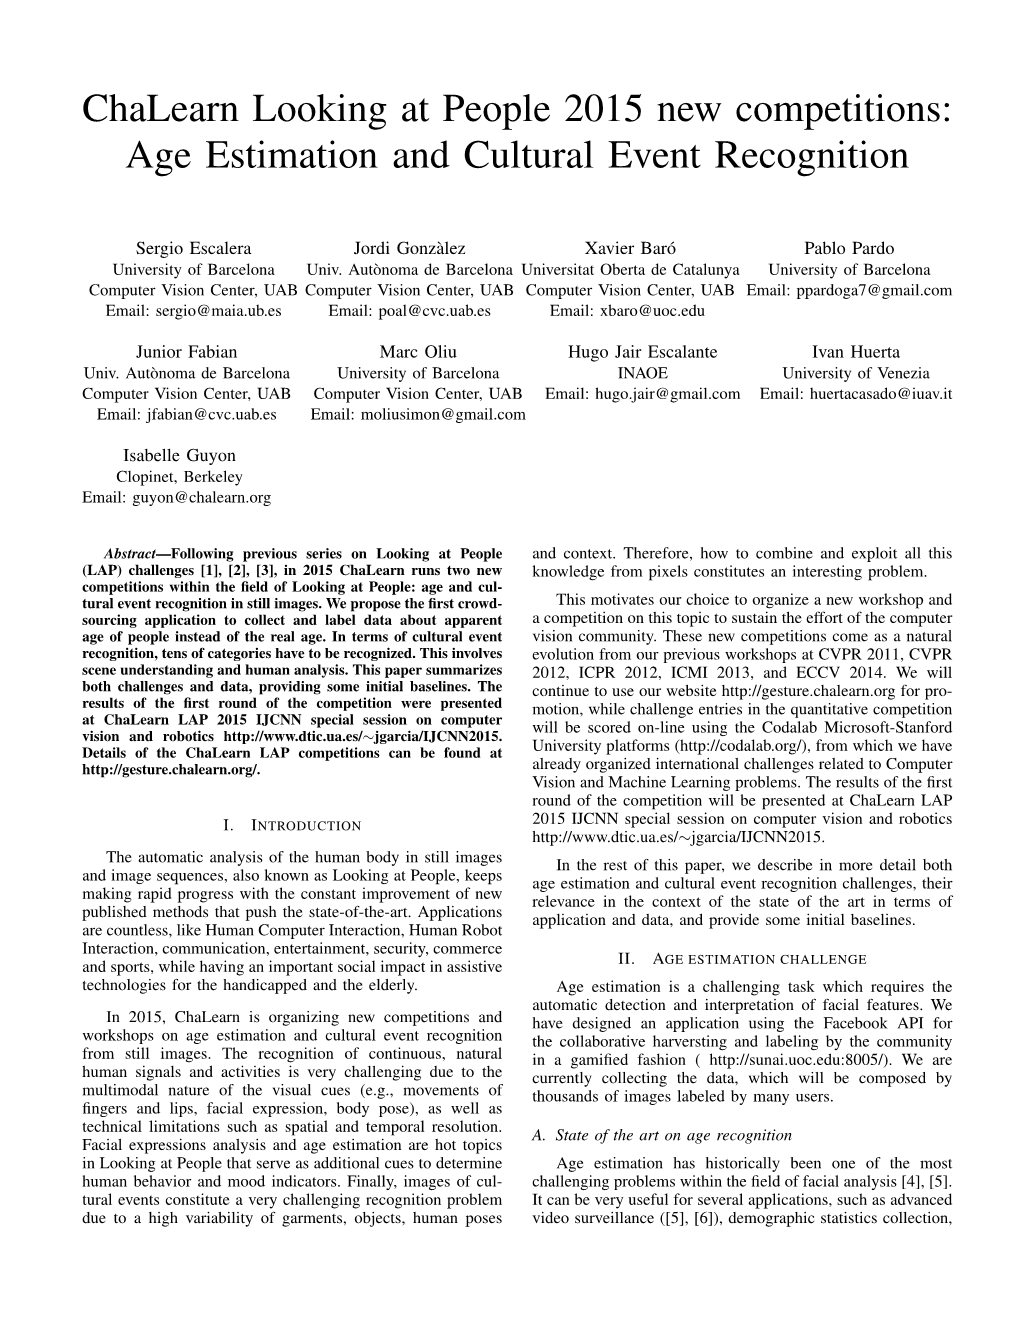 Age Estimation and Cultural Event Recognition